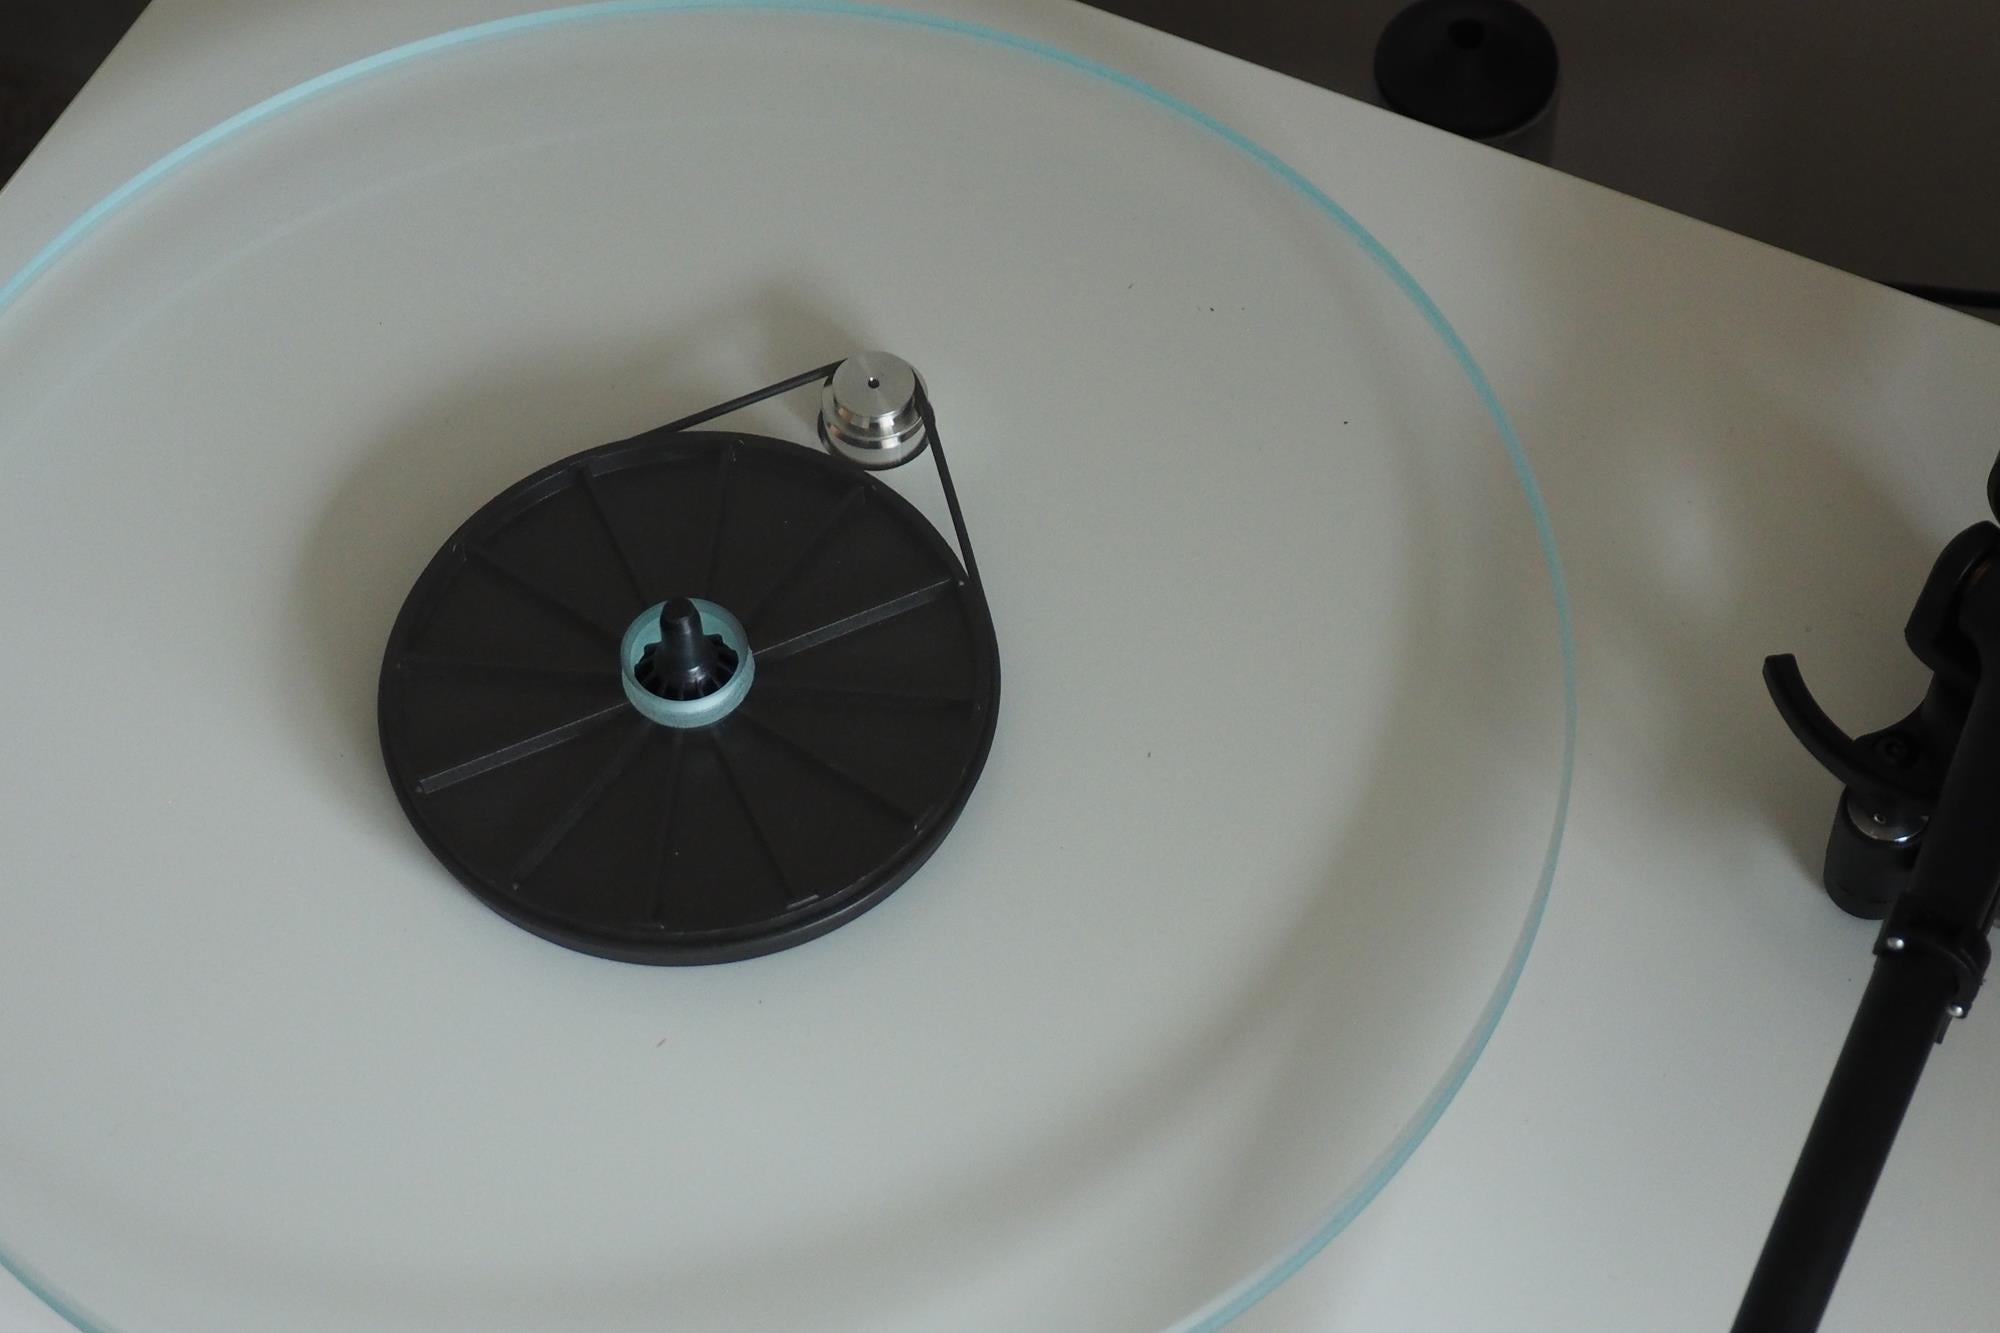 Rega Planar 2 turntable with tonearm and platter visible.